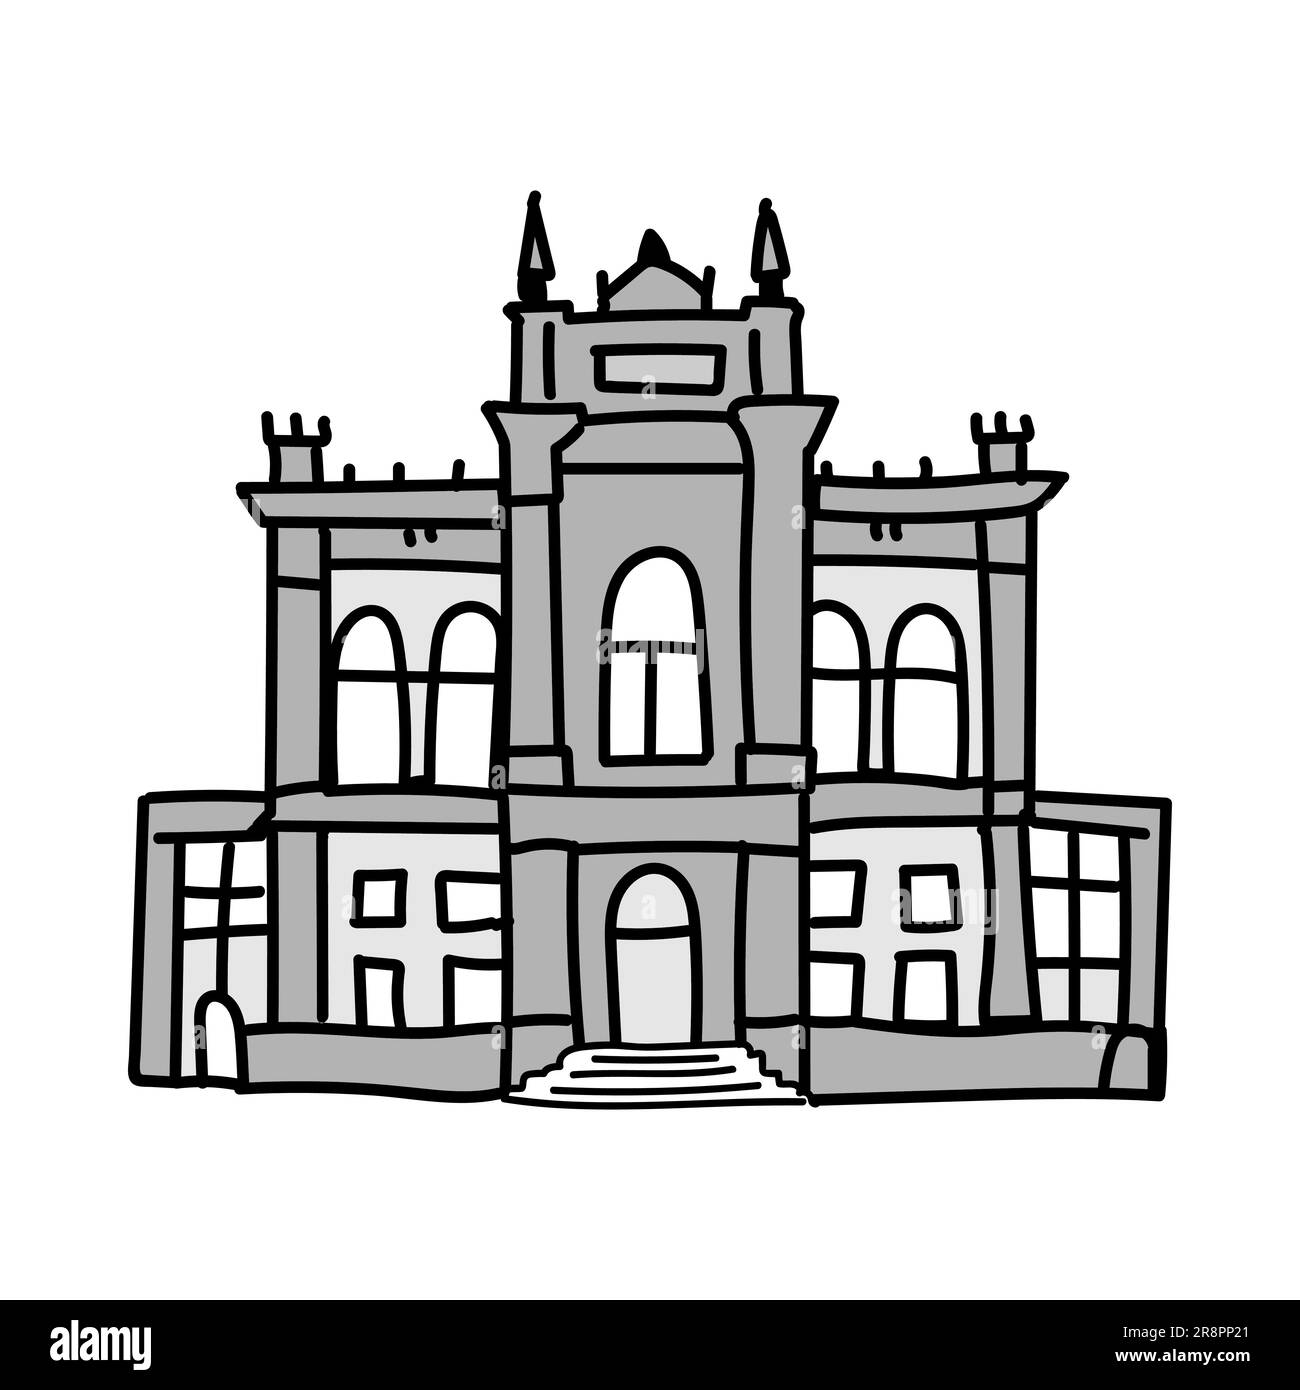 Grey urban building in the classical style with columns with capitals. Old university or museum. Vector illustration isolated on white background Stock Vector